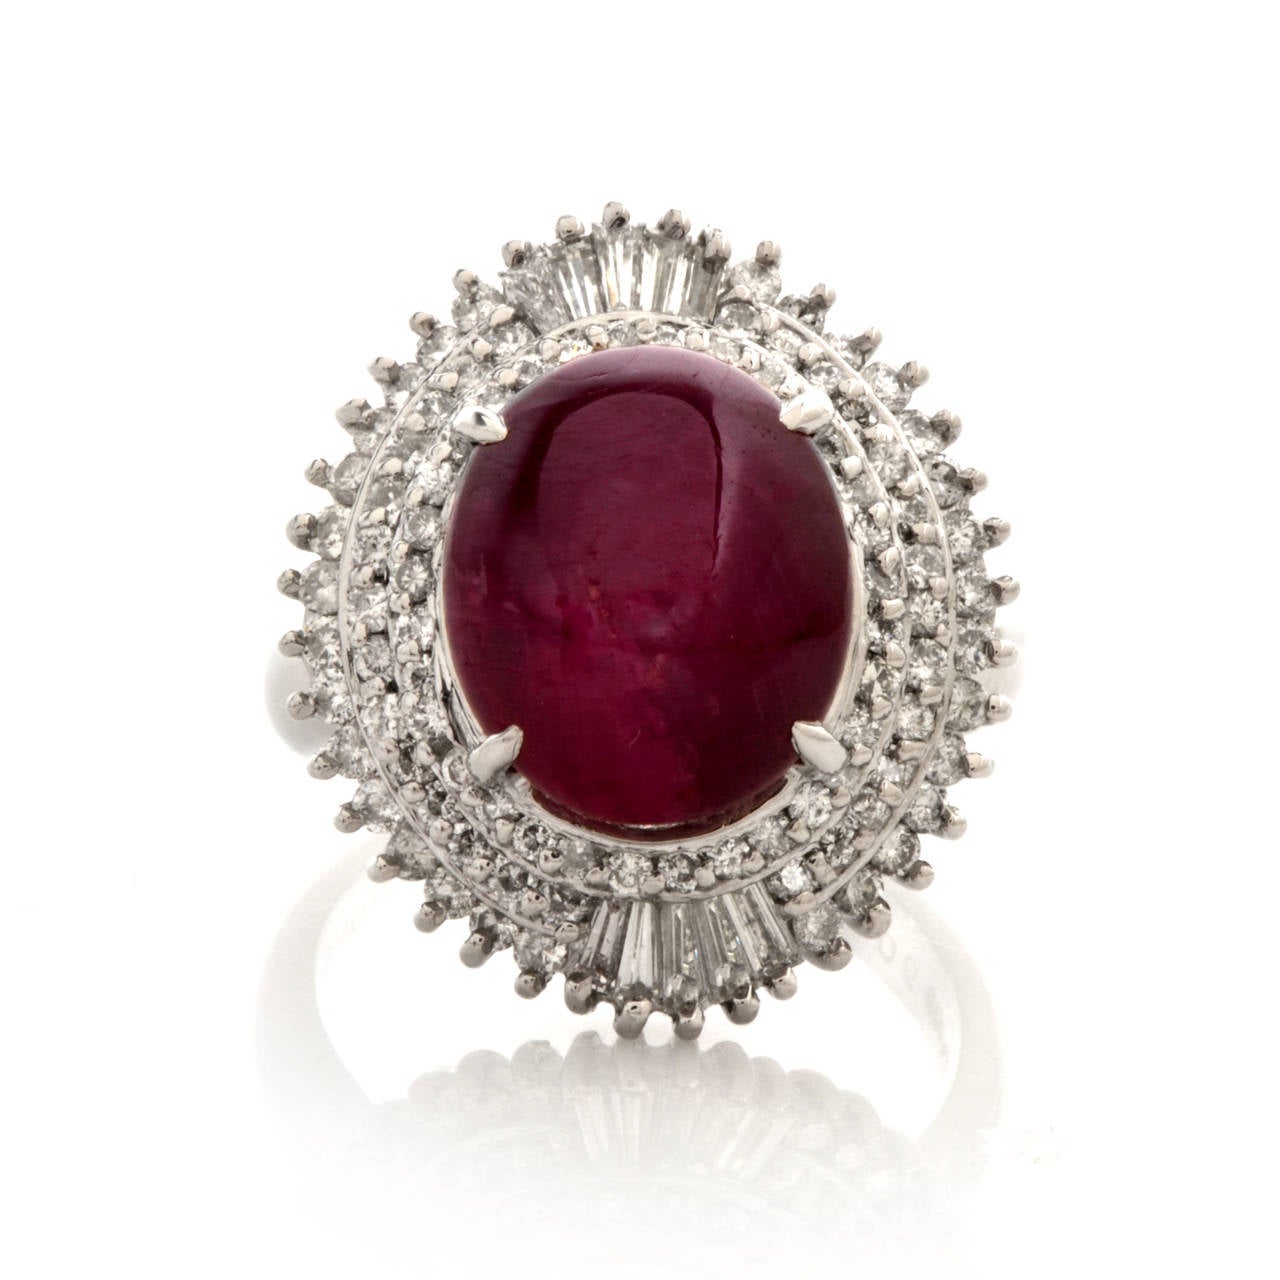 This cocktail ring with an oval cabochon star ruby, tapered baguettes and round-faceted diamonds is crafted in solid platinum and weighs 12.9 grams. Designed as a marquise-shaped plaque, this vivacious  cocktail ring is centered with a 9.08ct star